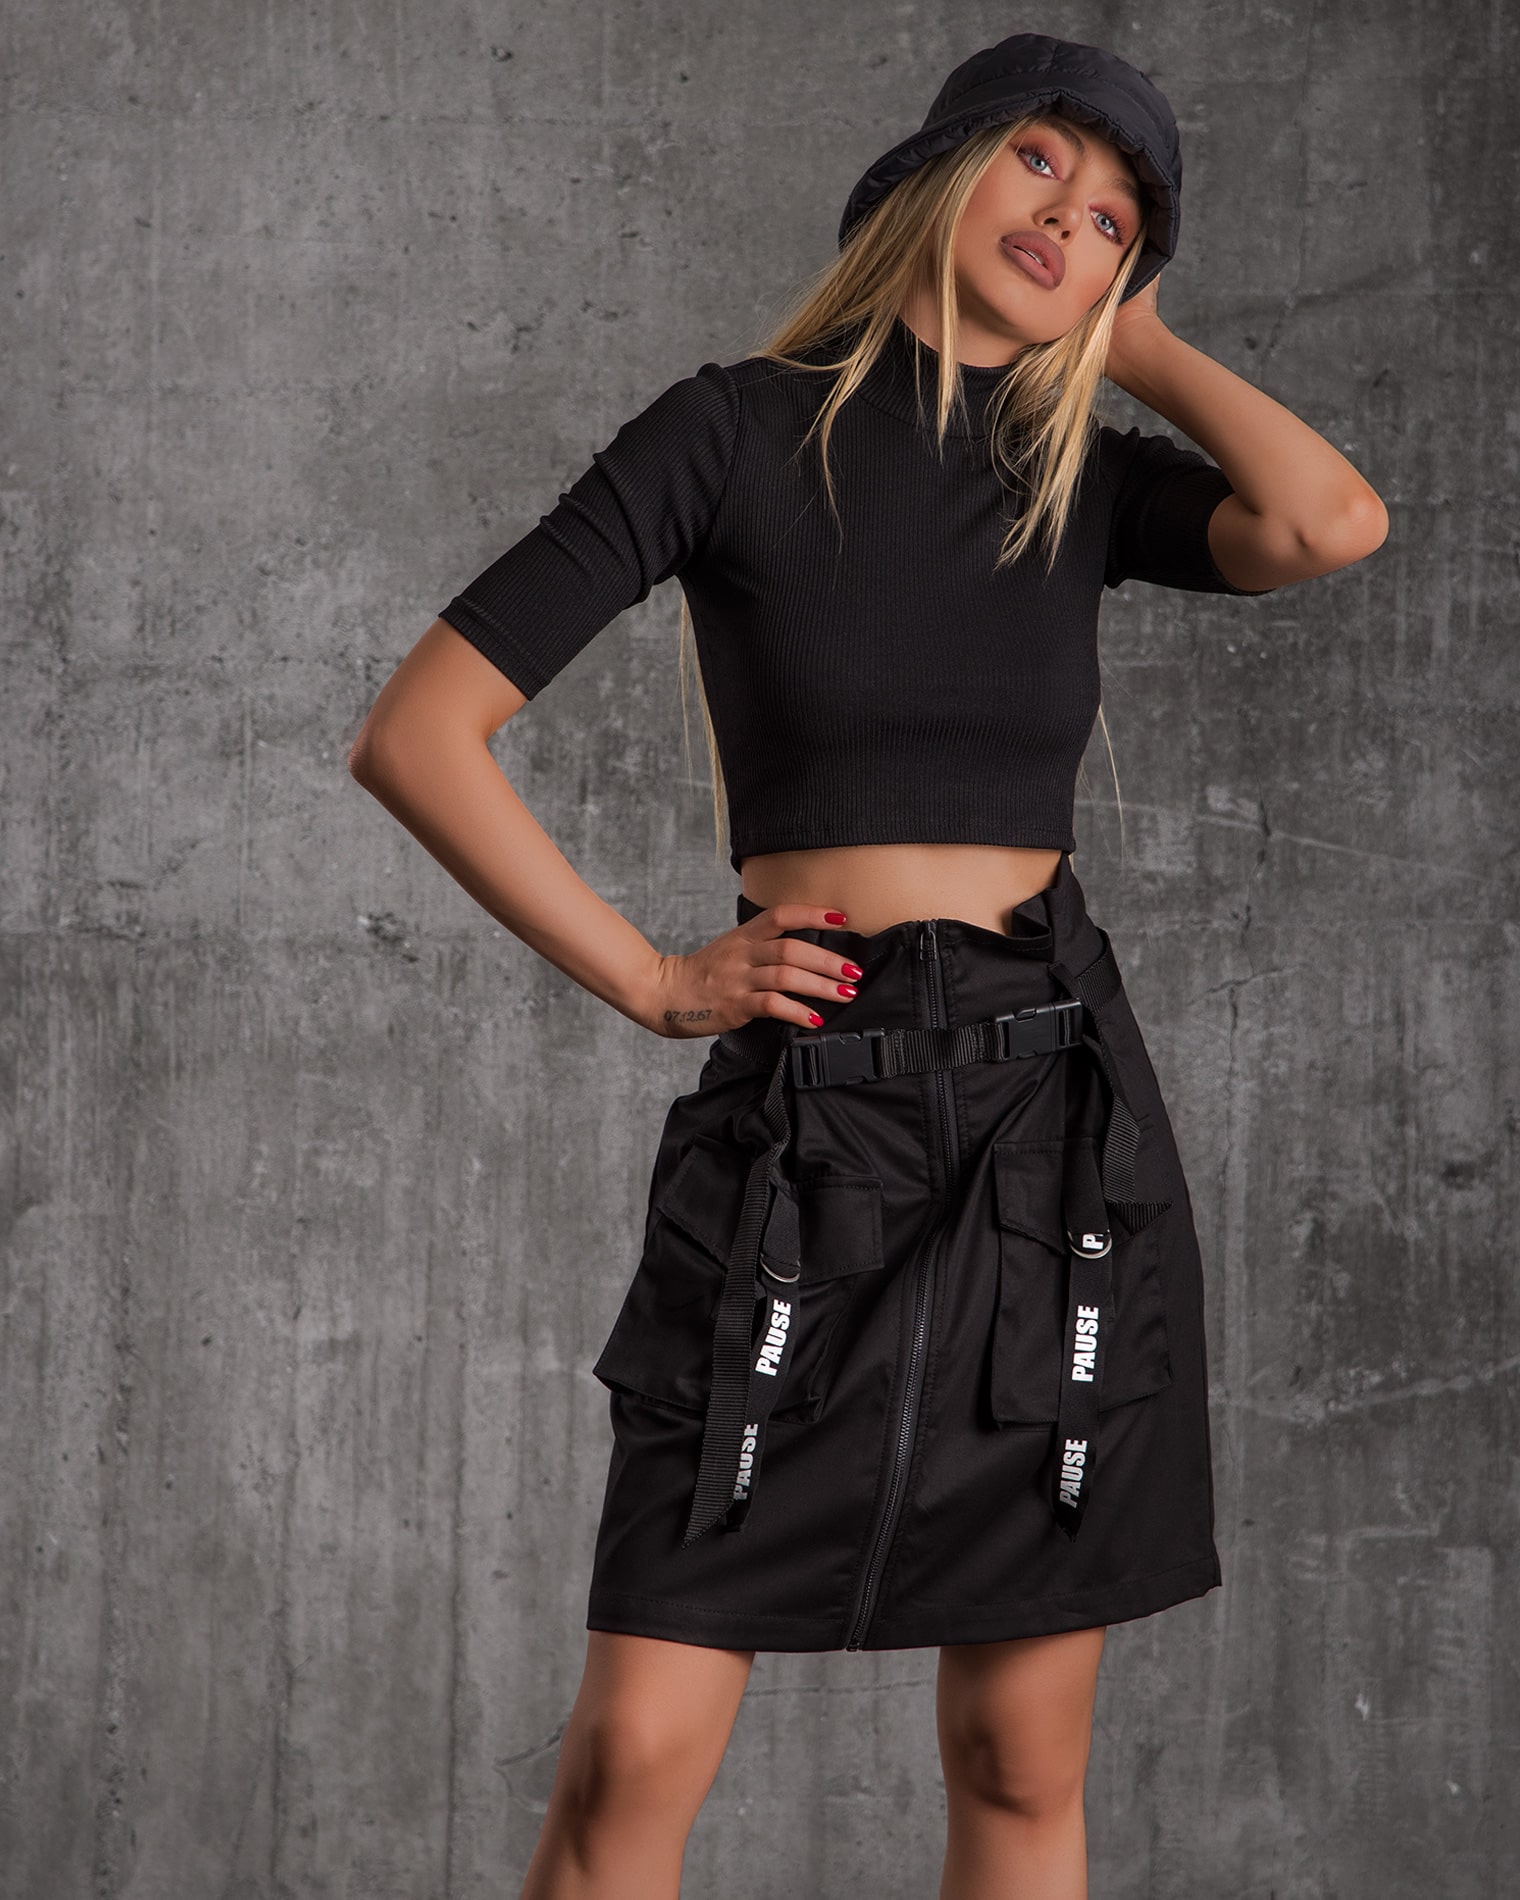 Cupcake Skirt With A Belt, Black Color